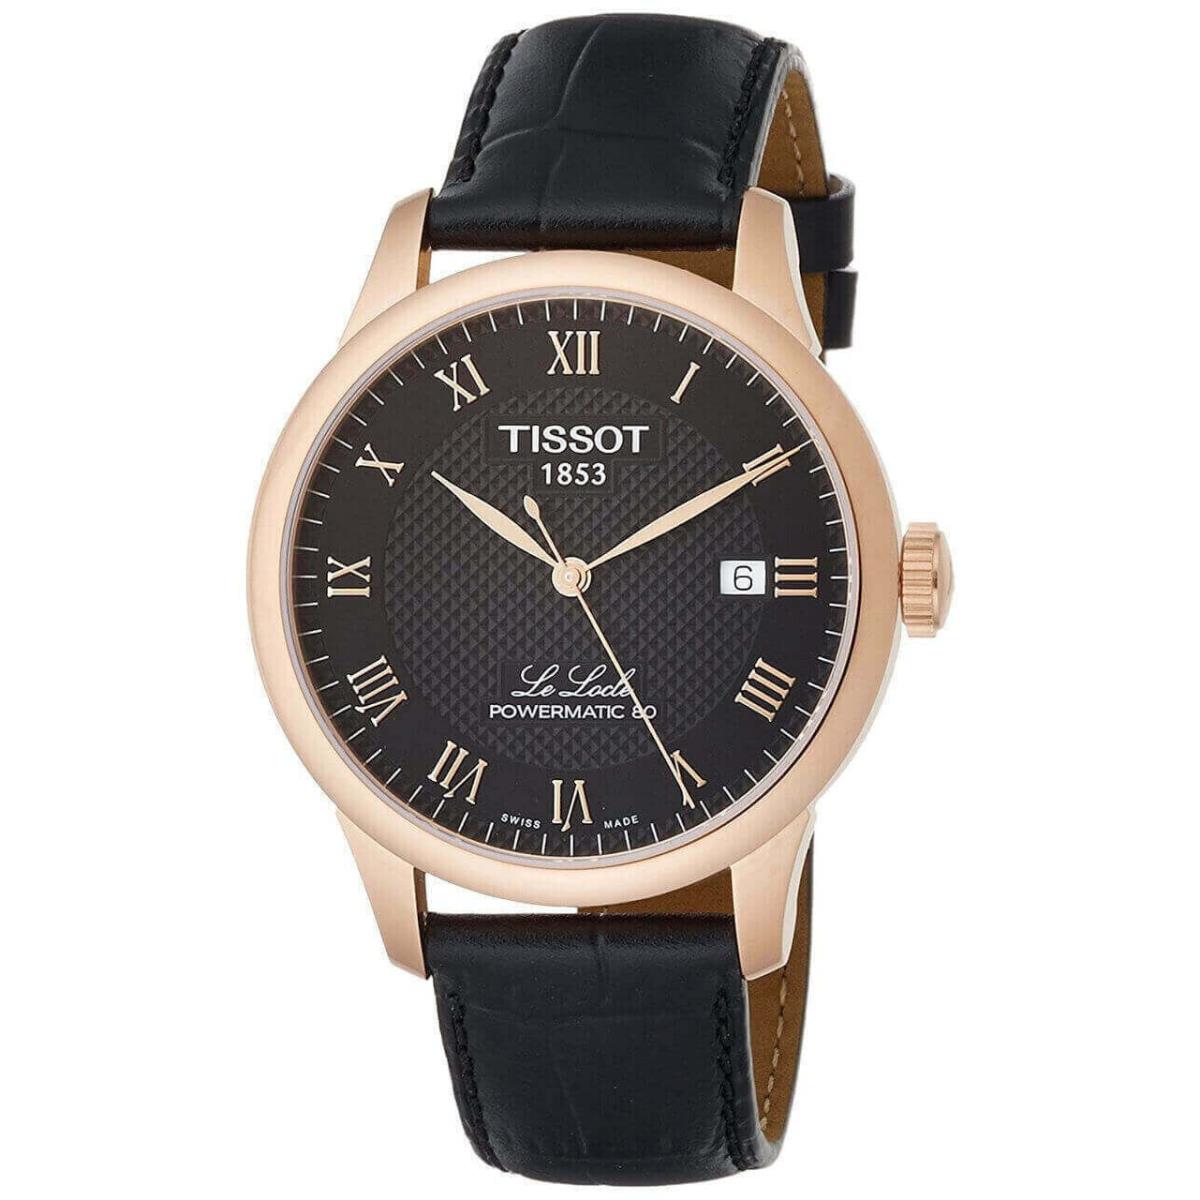 Tissot Le Locle Powermatic 80 Rose-g Pvd Blk Dial Watch T0064073605300